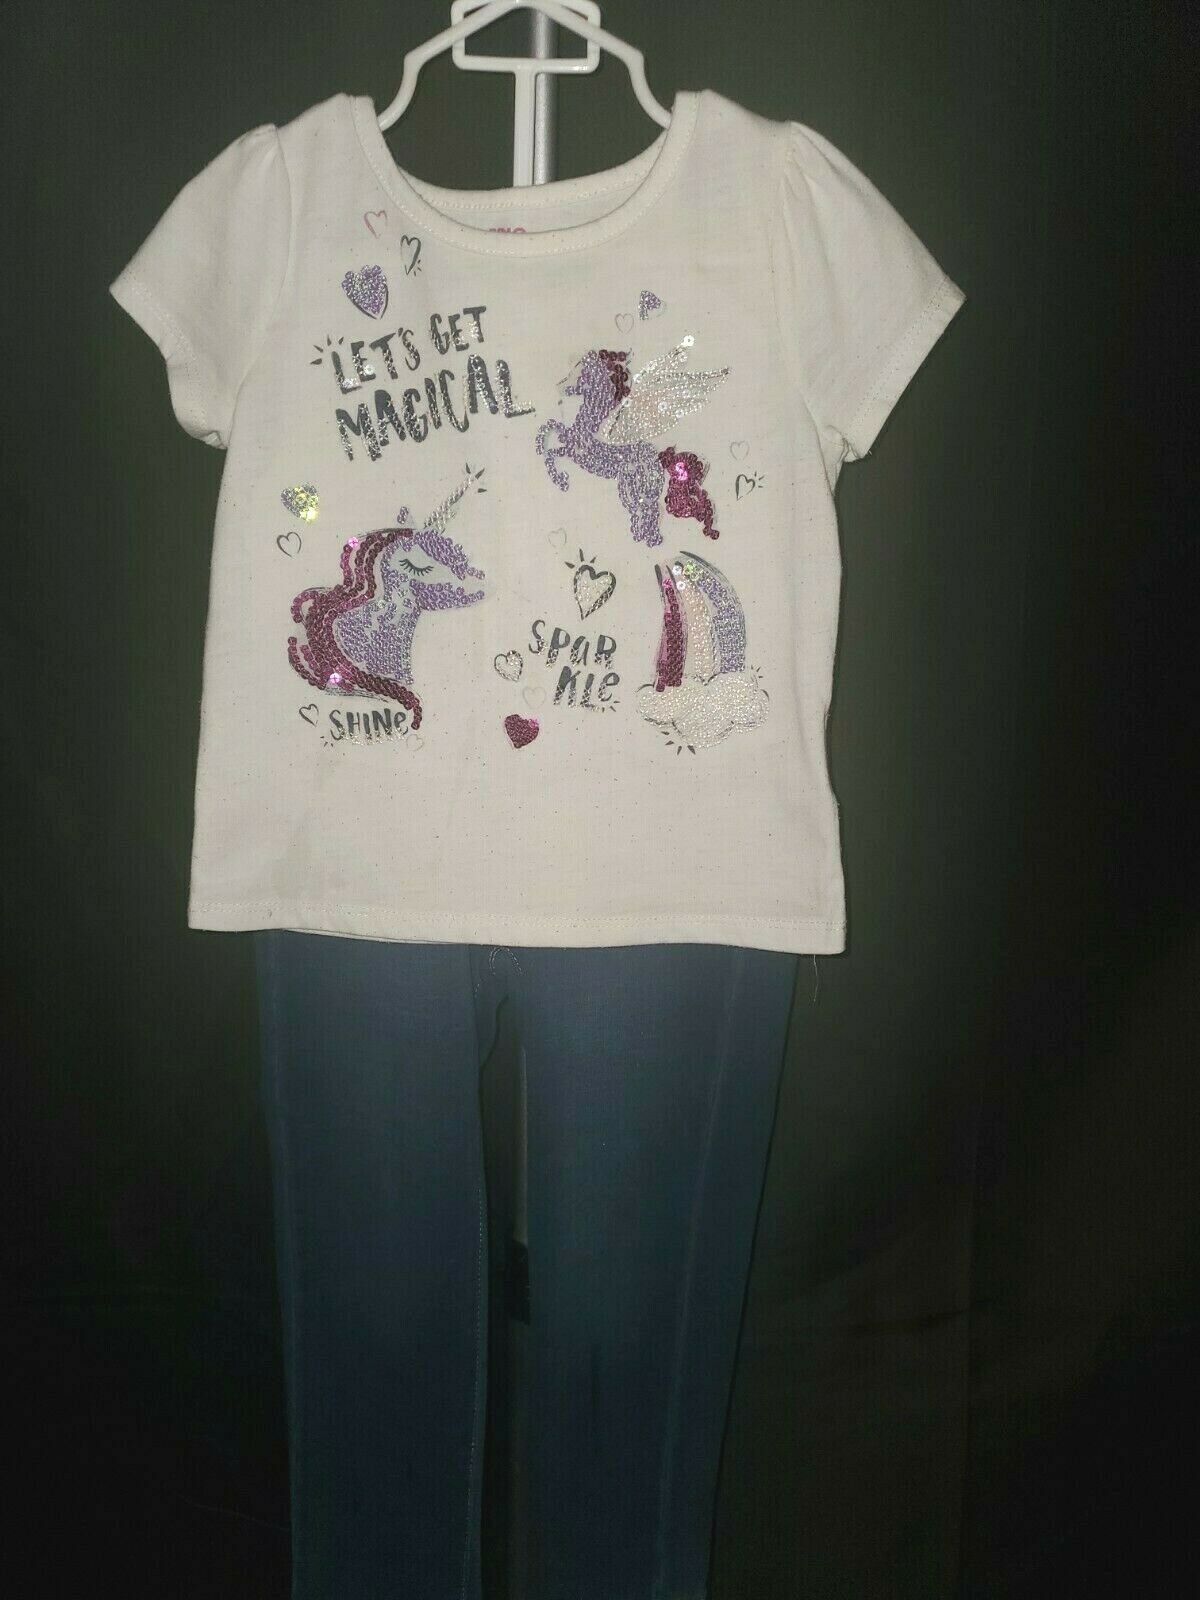 4T ~ Sparkly Unicorn outfit - $15.90